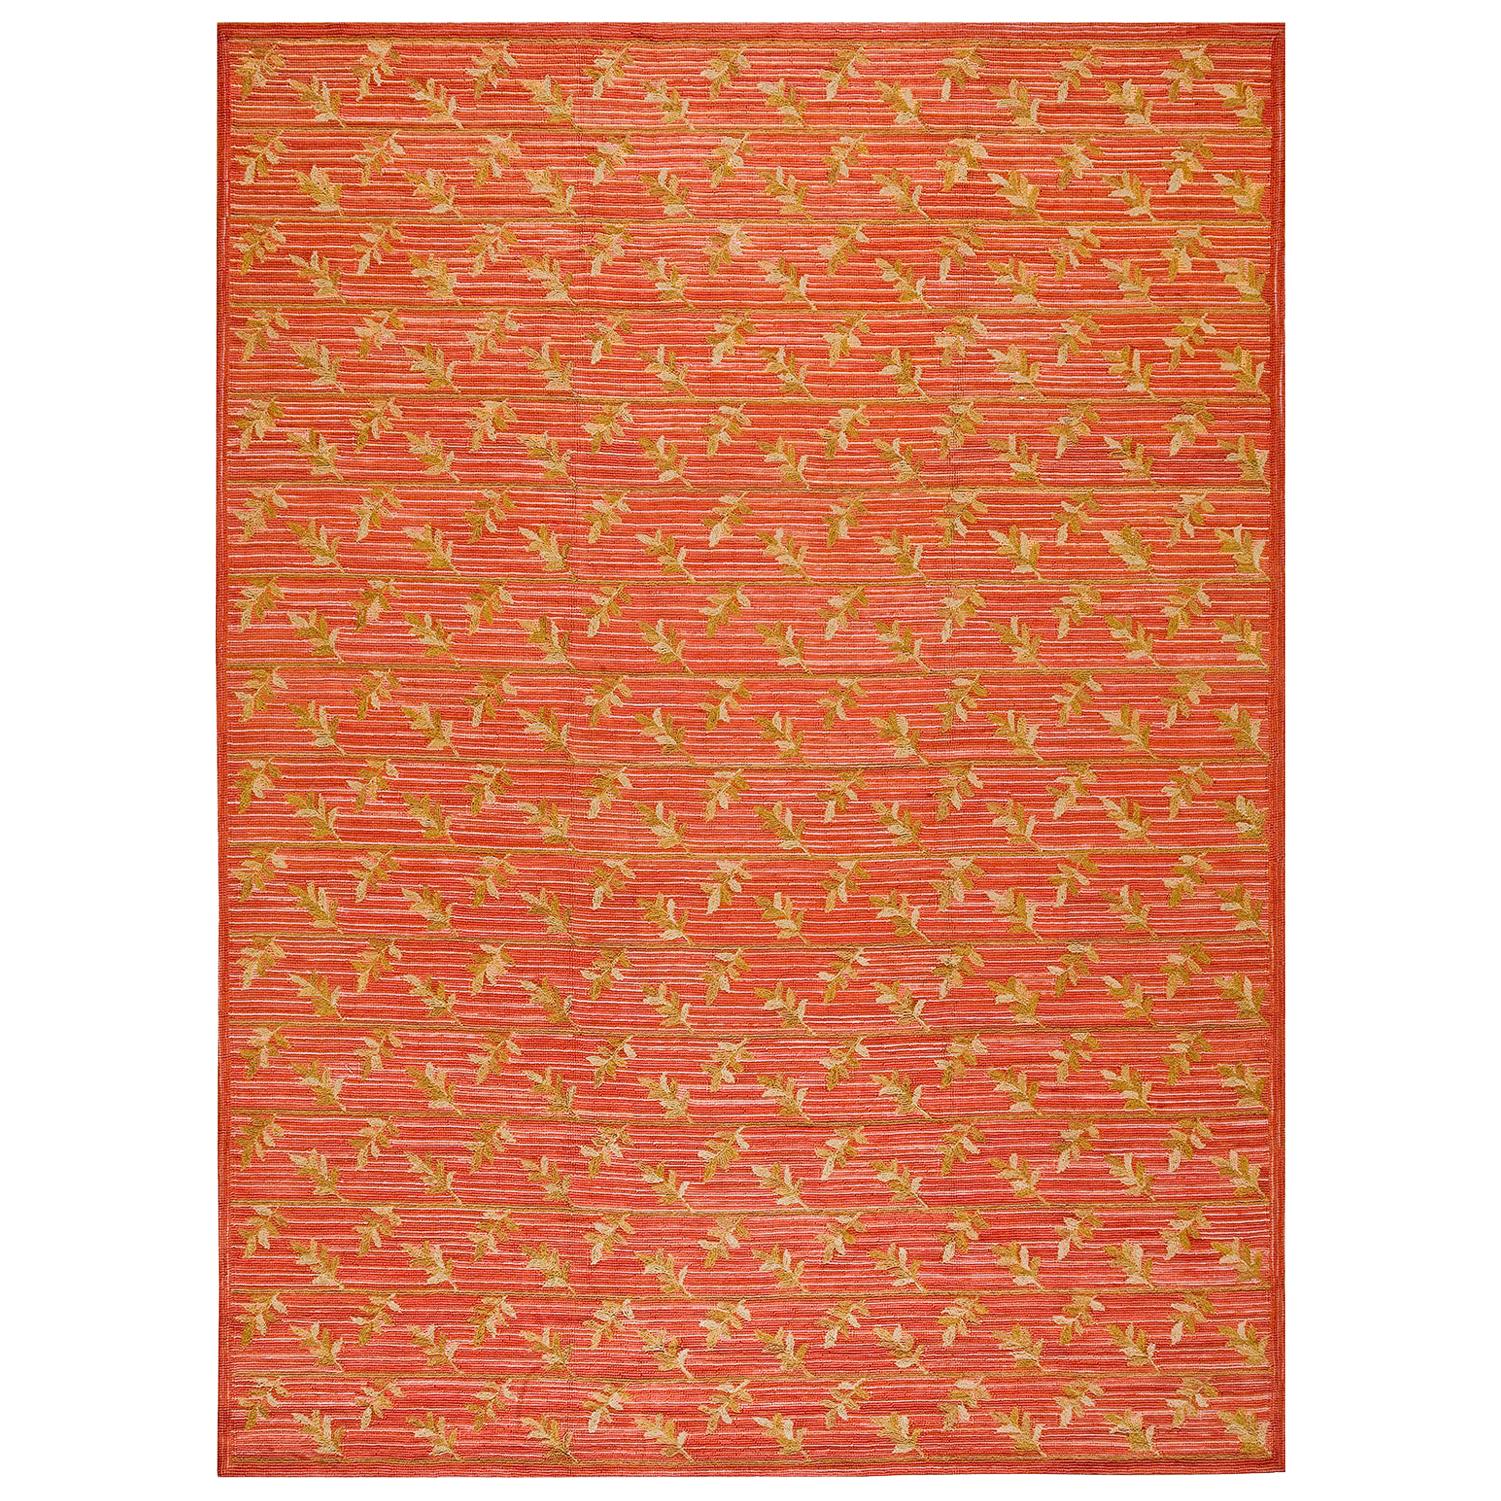 Contemporary American Hooked Rug (6' x 9' - 182x 274)